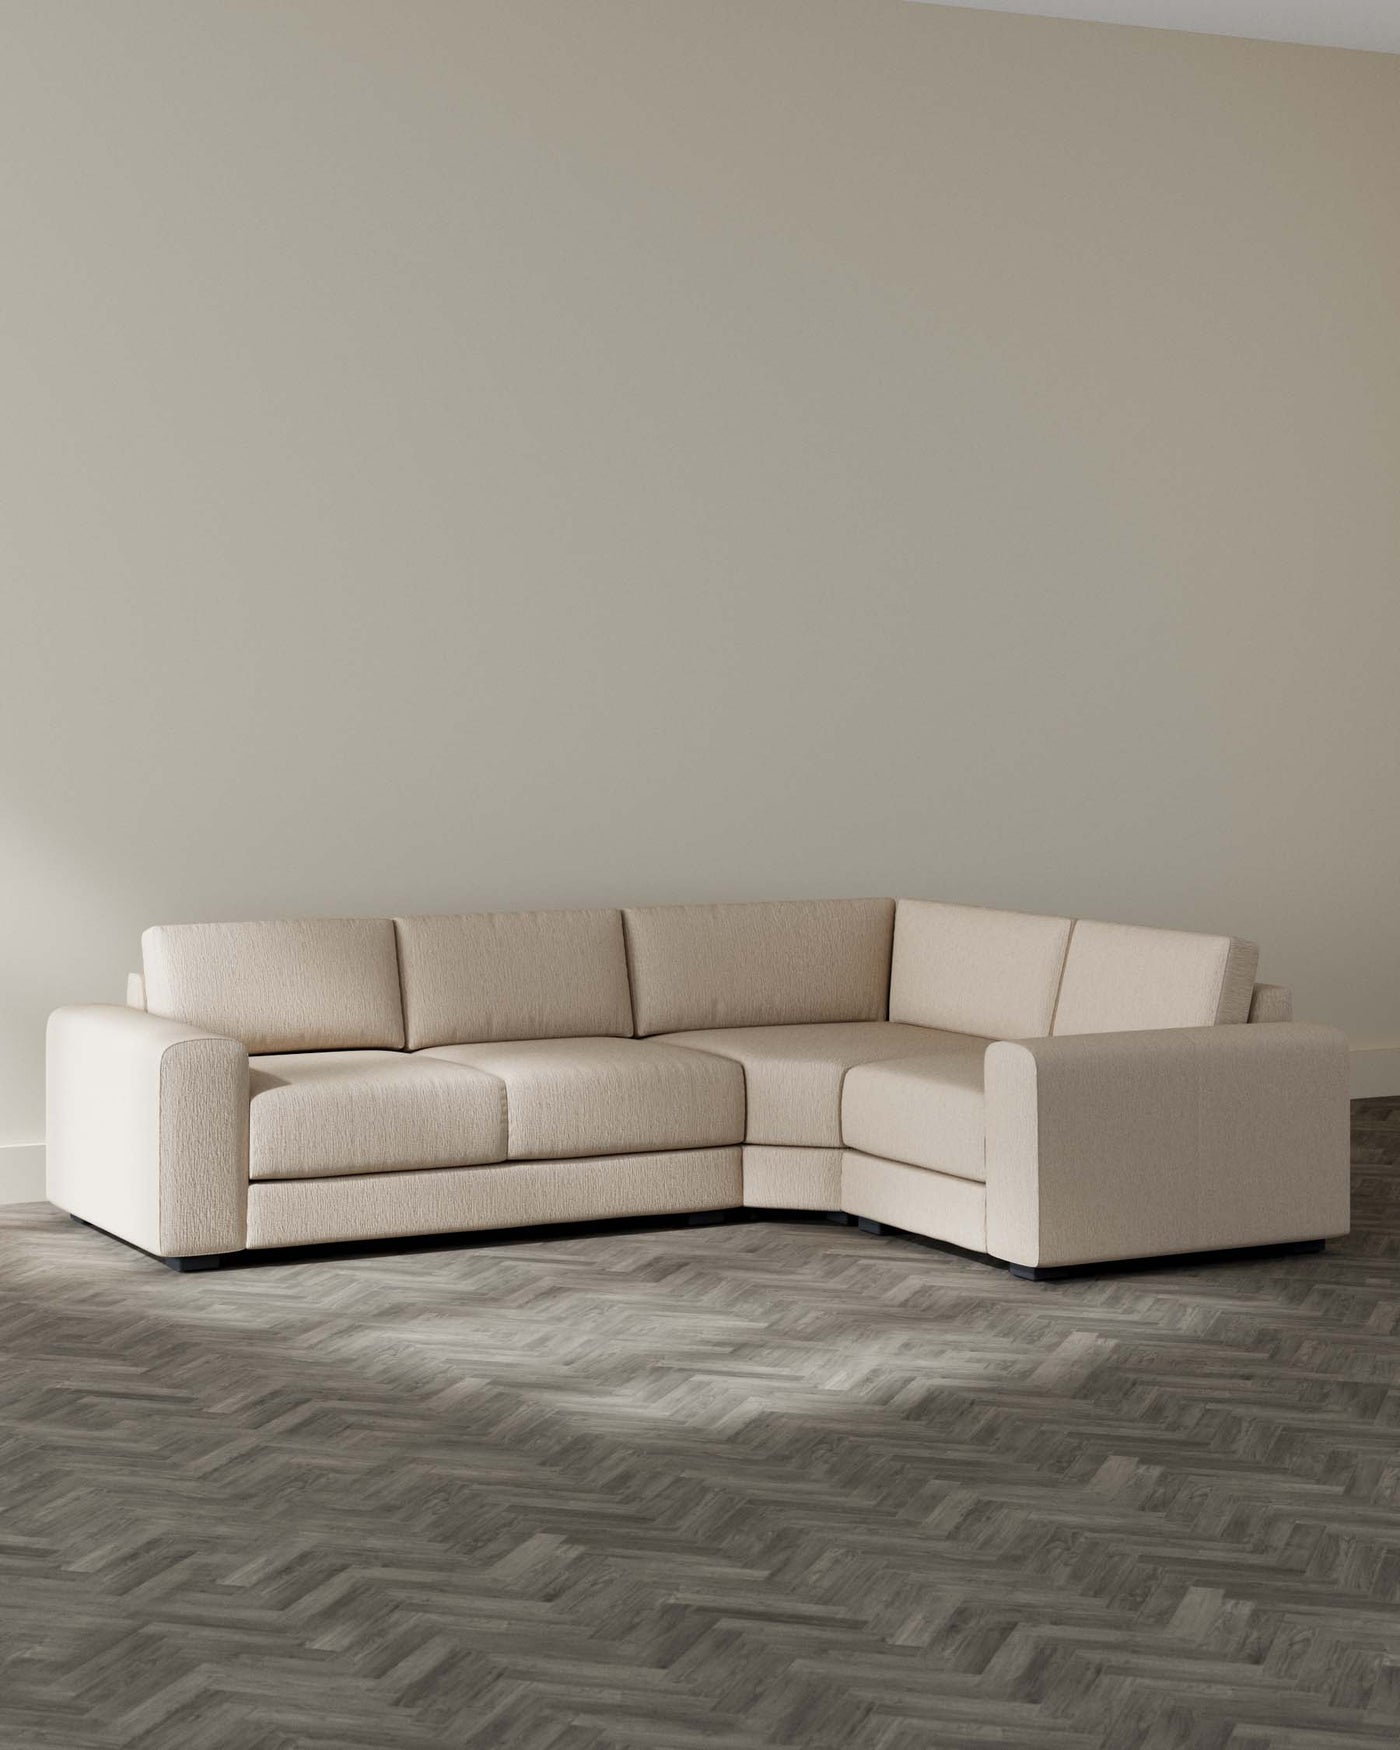 Modern beige corner sectional sofa with minimalist design and textured upholstery, featuring a clean-lined silhouette with a low backrest and wide, plush seating, set on a herringbone patterned wooden floor.